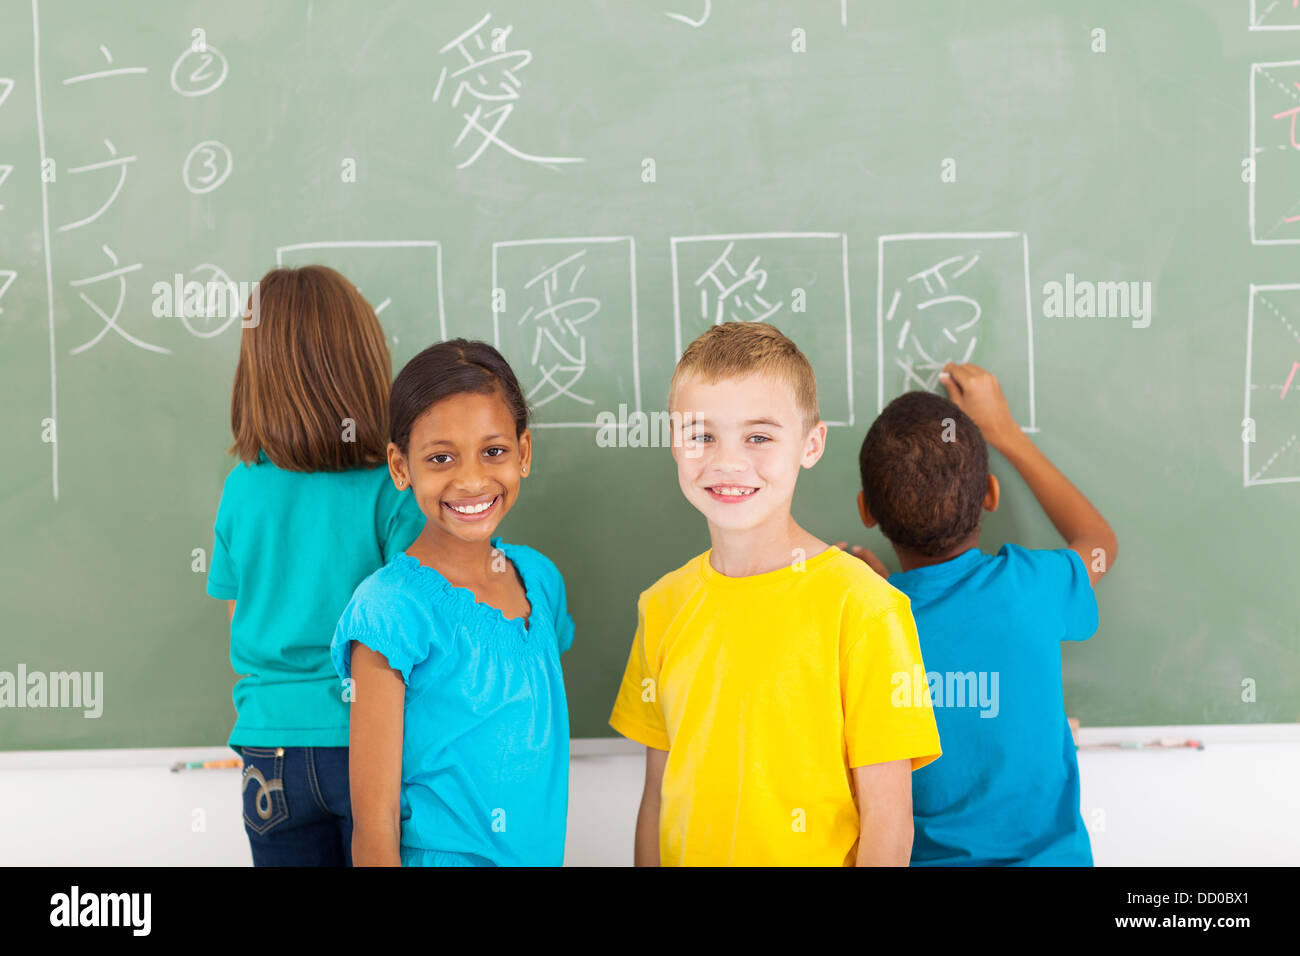 cheerful elementary school students after writing chines on chalkboard Stock Photo